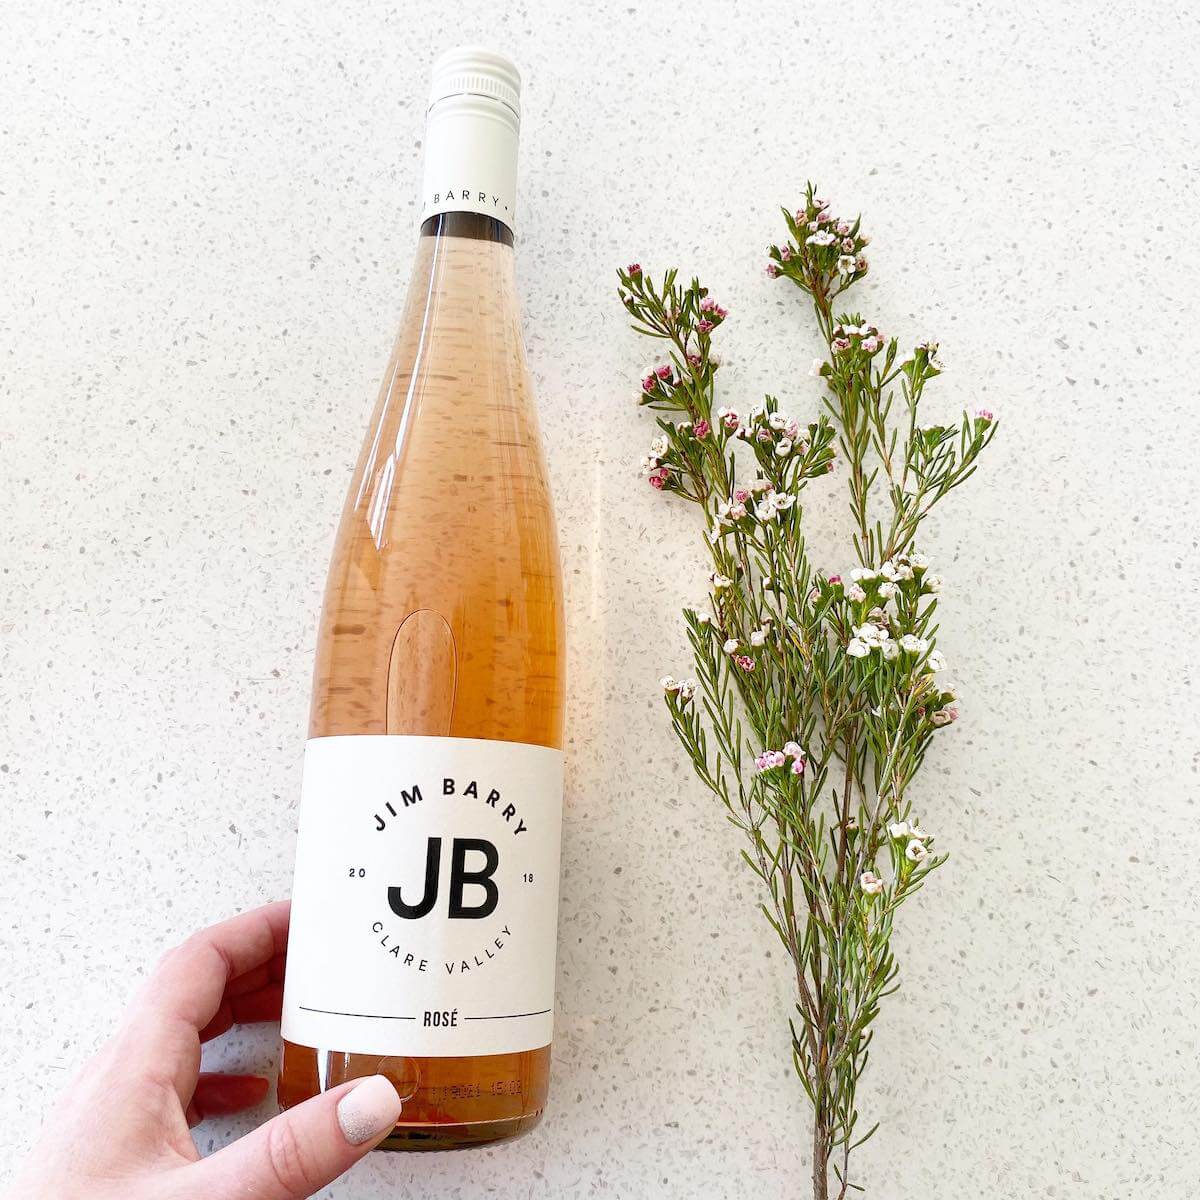 Jim Barry JB 2018 Rose – Clare Valley